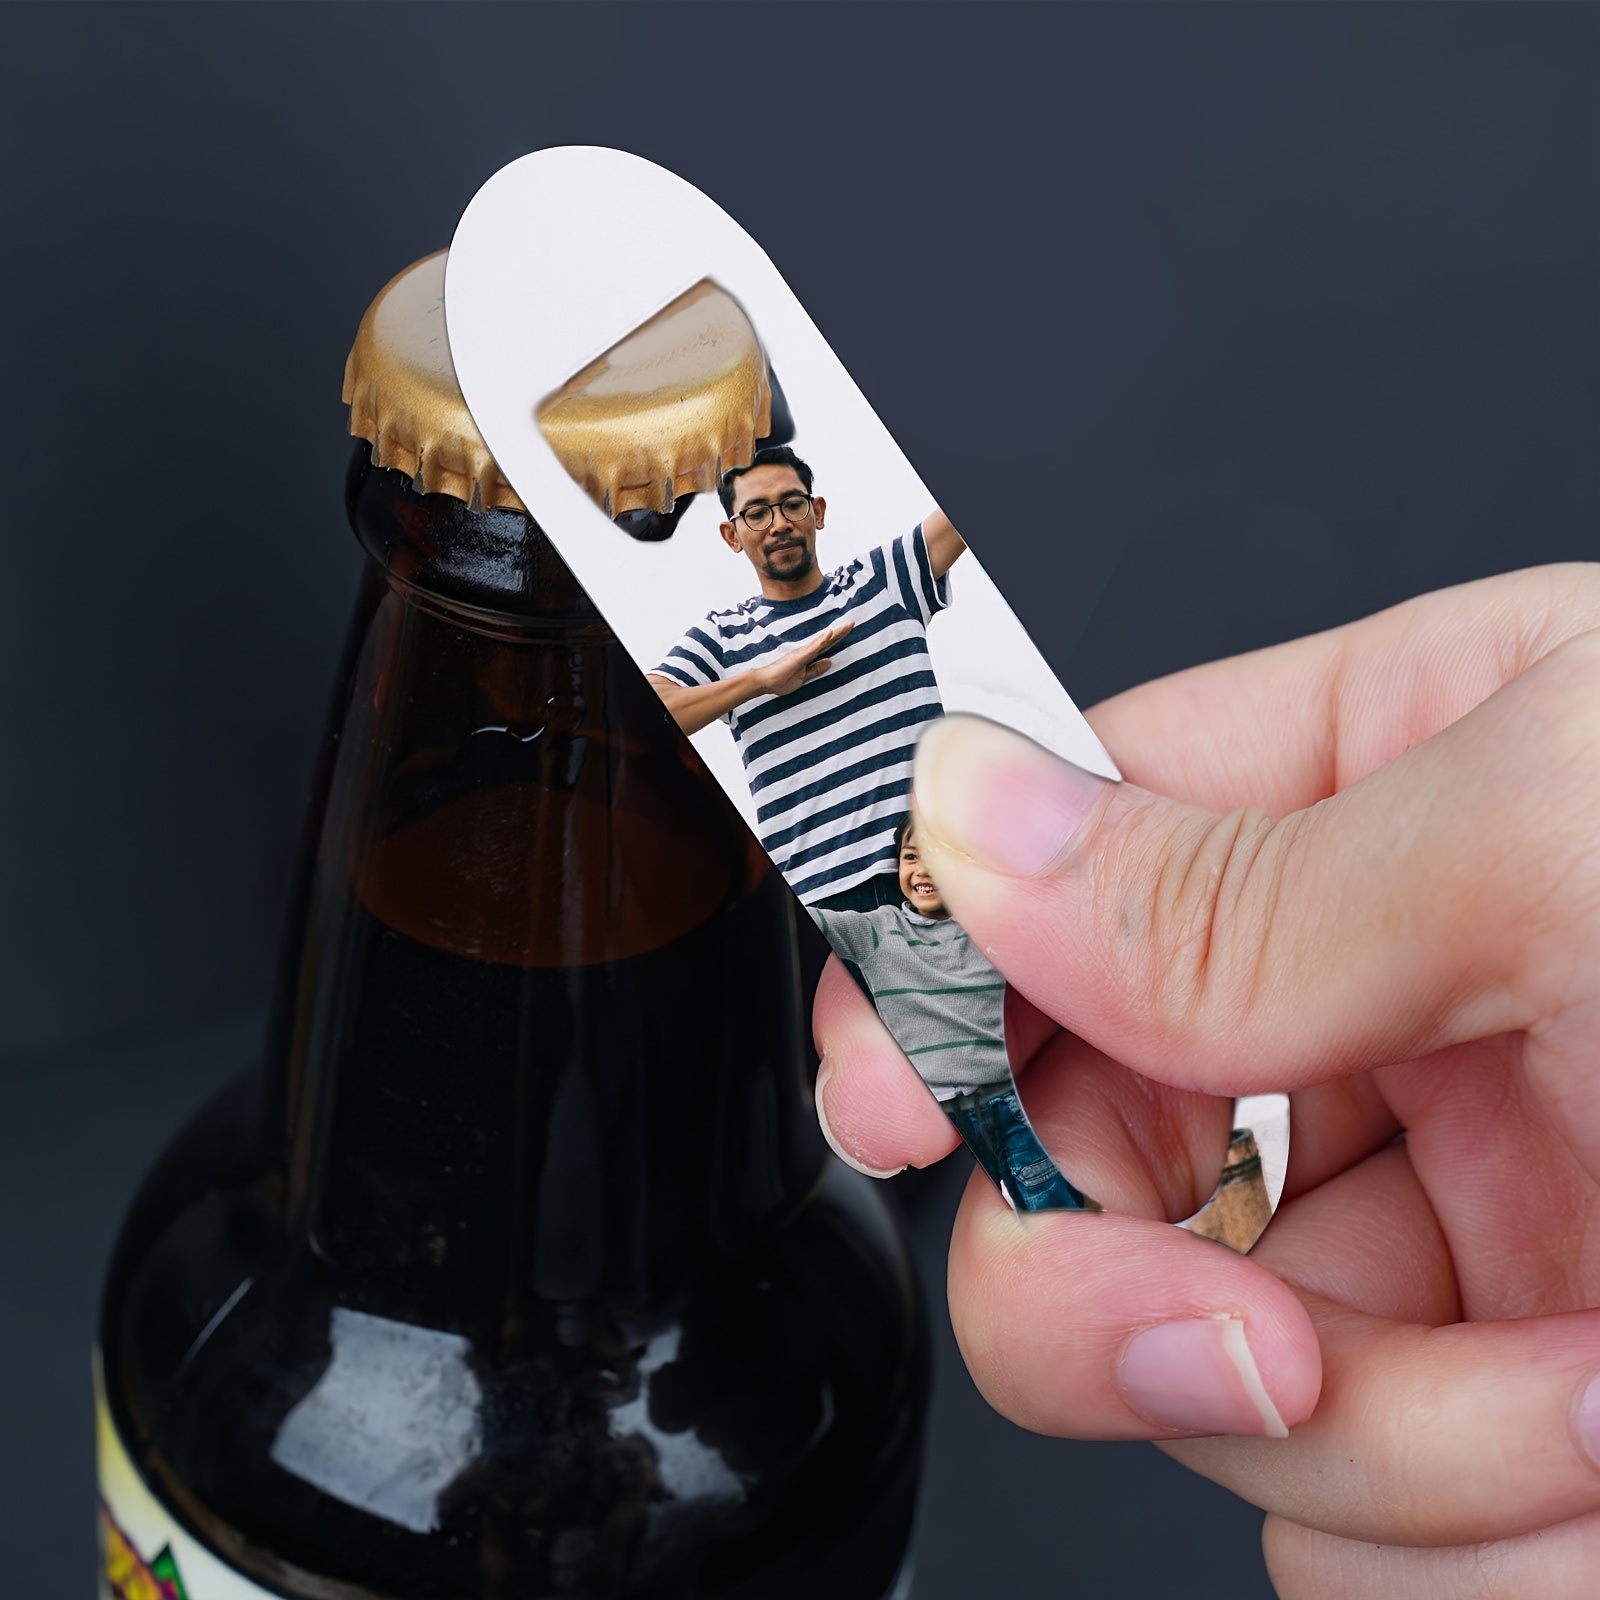 Sublimation Blanks Products Bottle Opener Stainless Steel White Beer Opener  2 Sided Bottle Style (5 Pieces) for Home, Bar, Restaurant Heavy Duty by